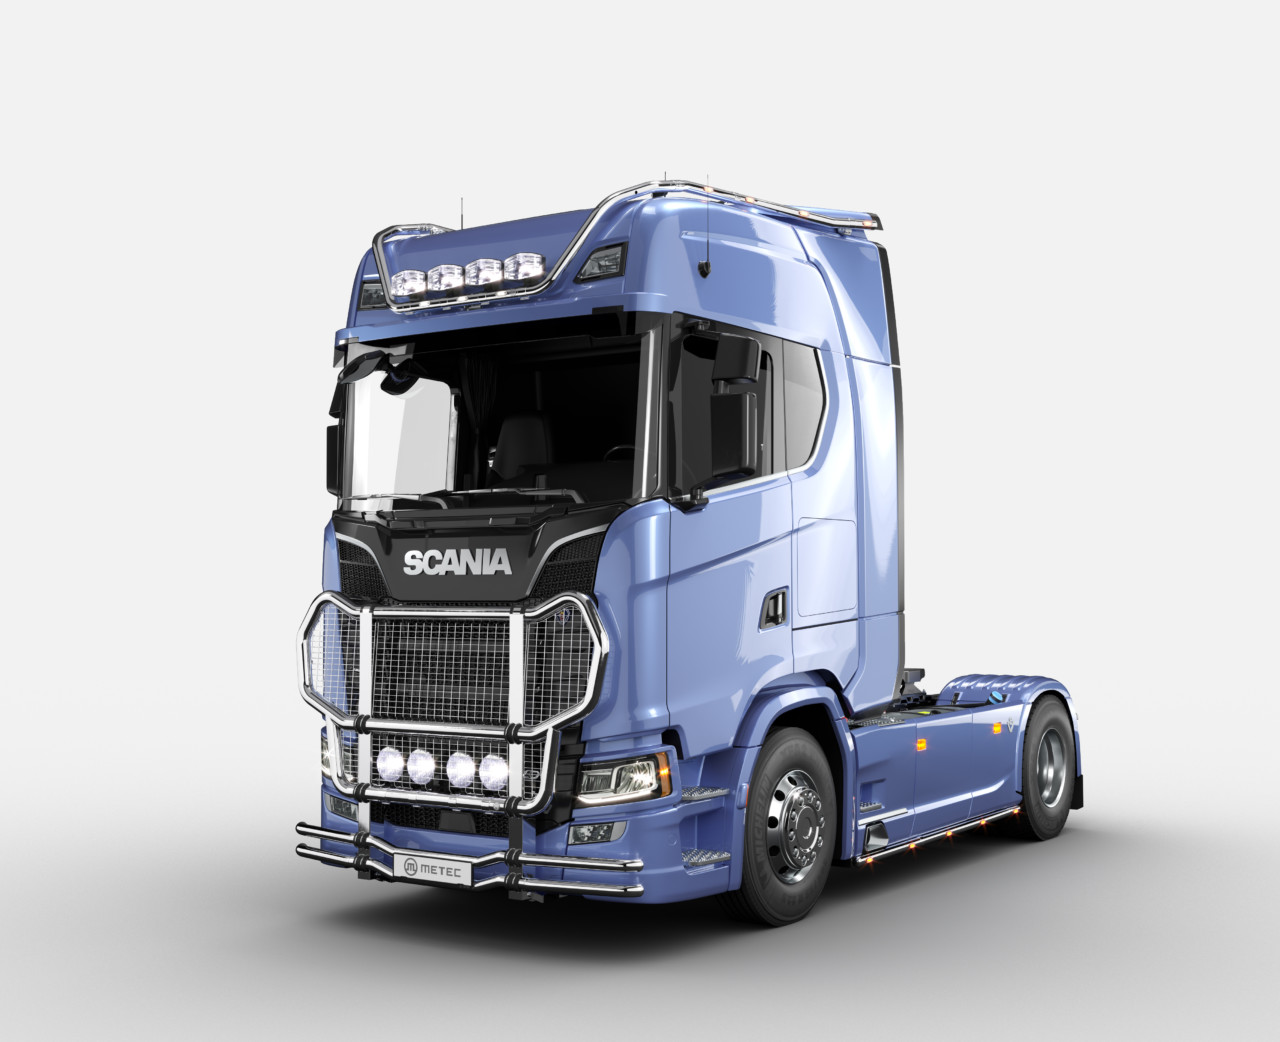 Blue Scania truck with added Metec accessories for road safety.